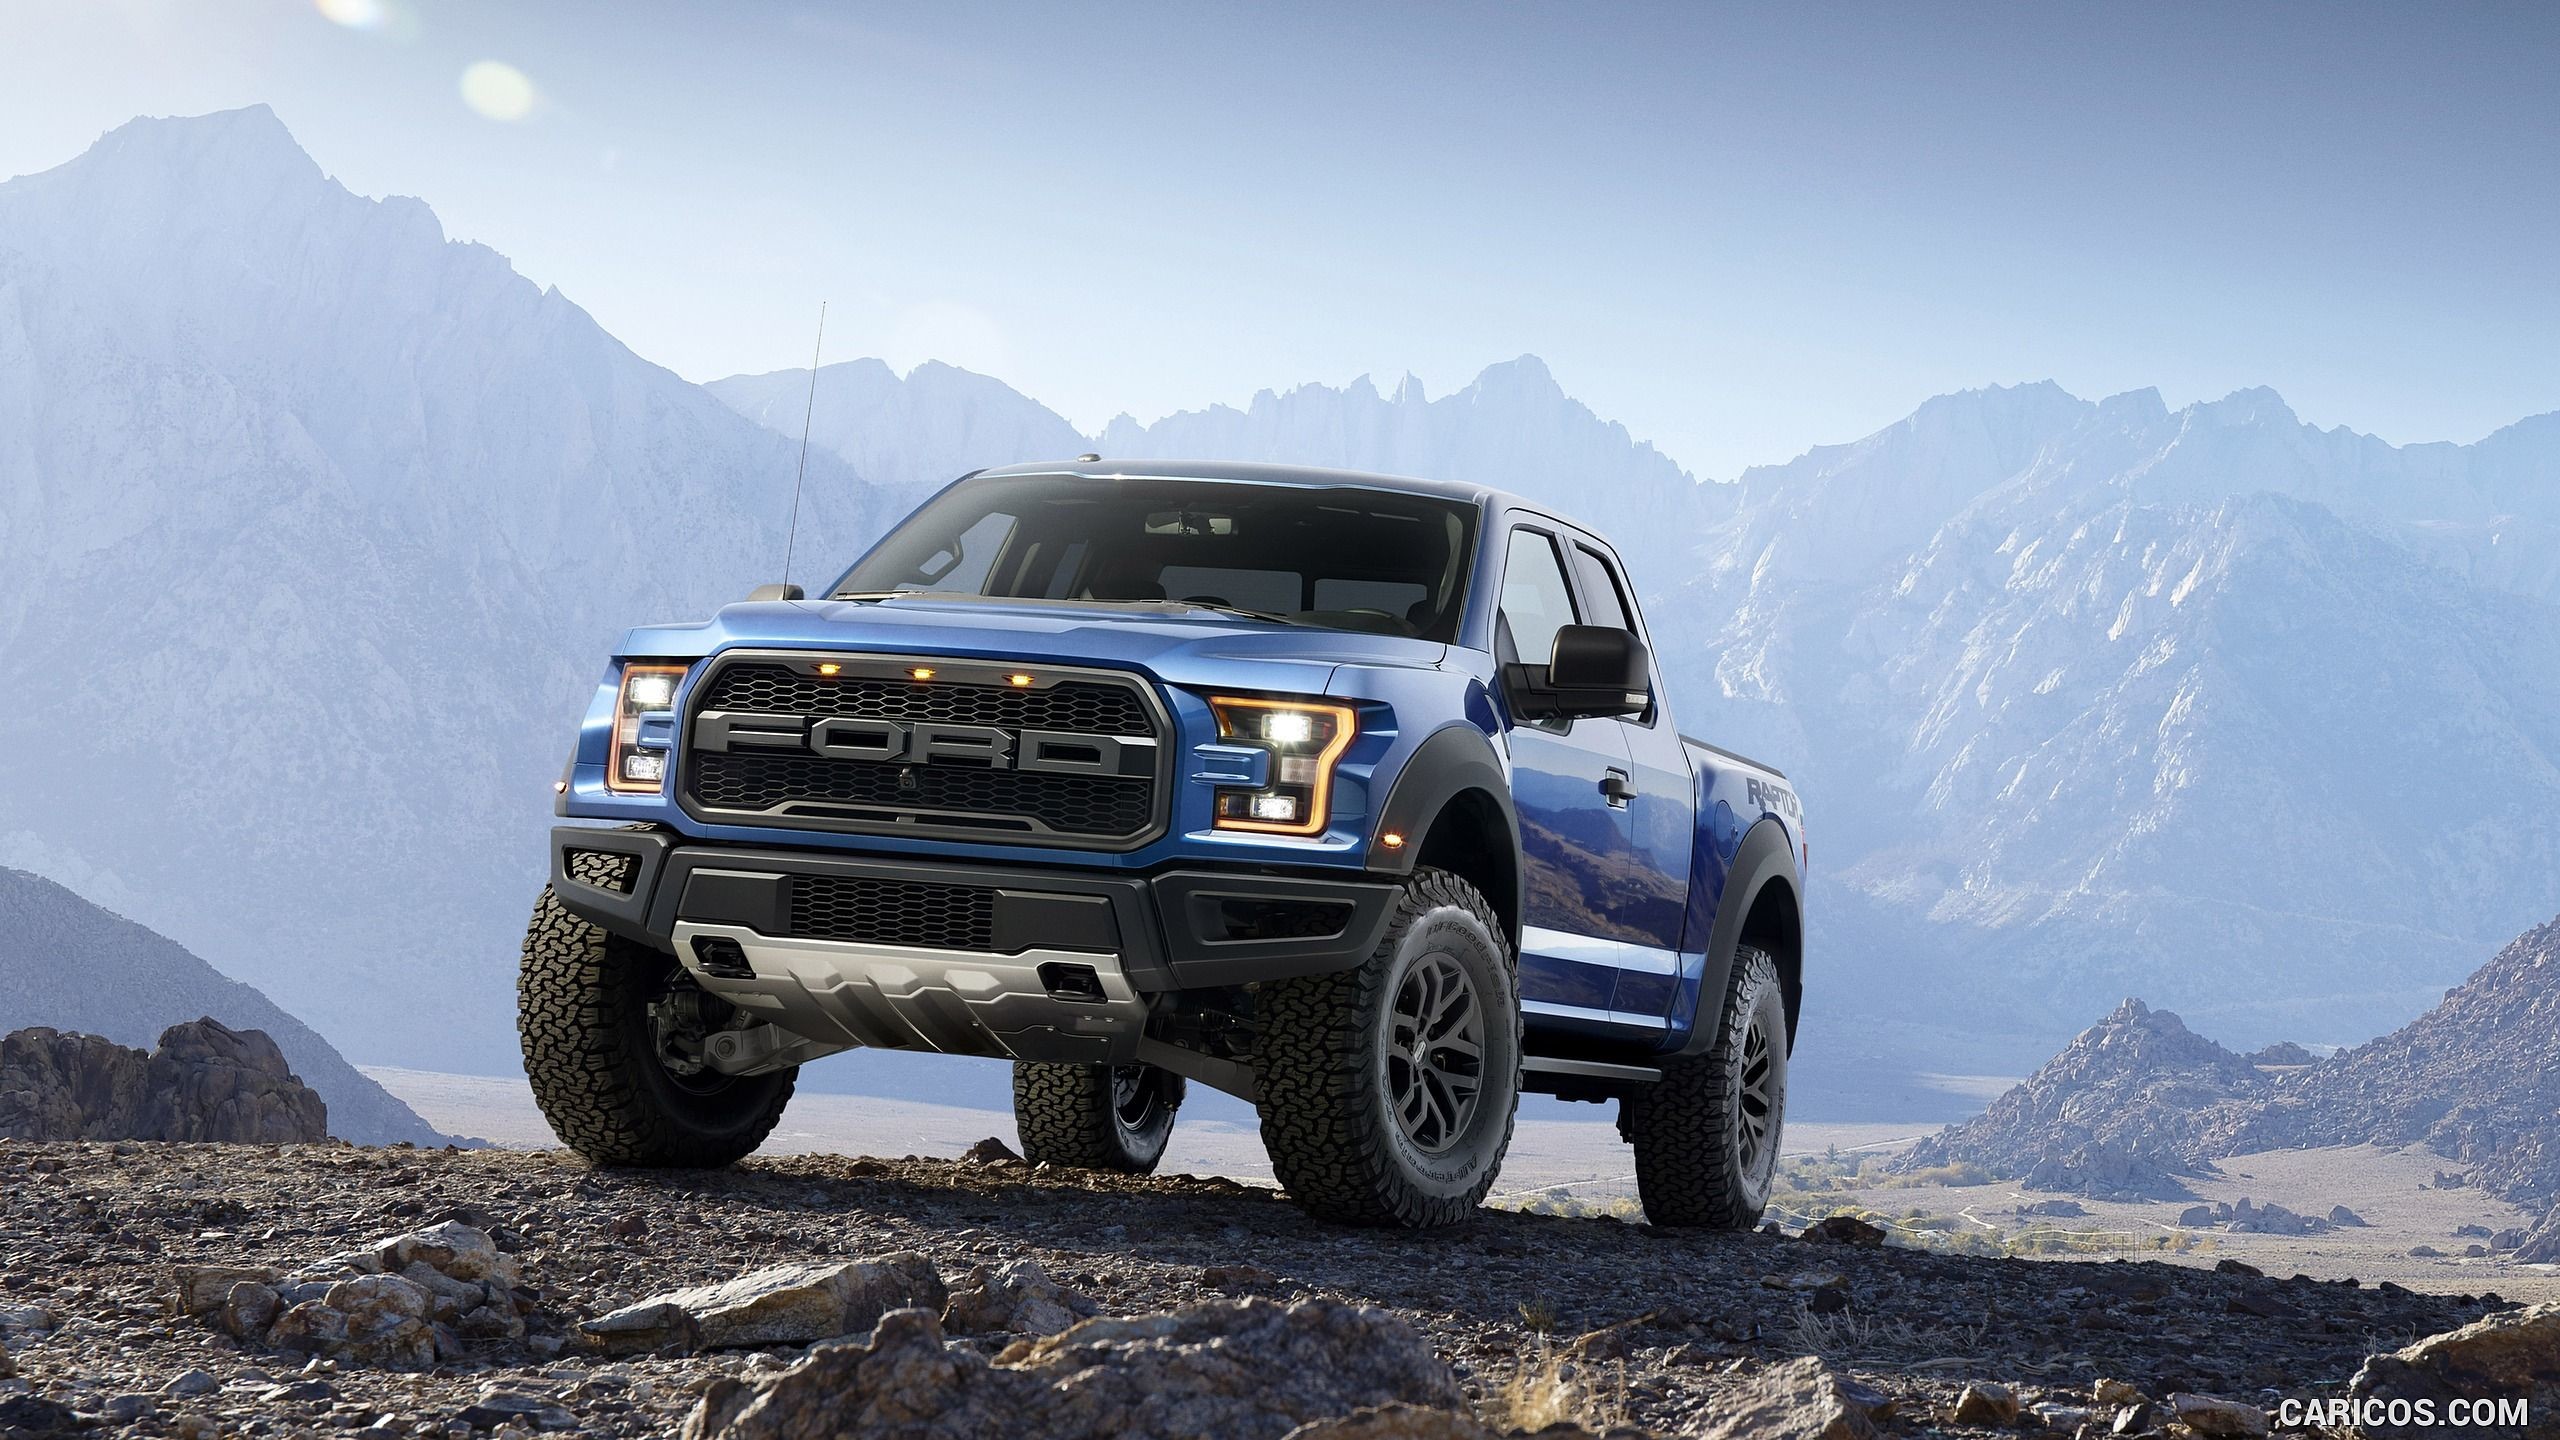 2560x1440 2017 Ford F-150 Raptor Wallpaper | Things to fill the Garage with |  Pinterest | Raptors wallpaper, Ford and Cars